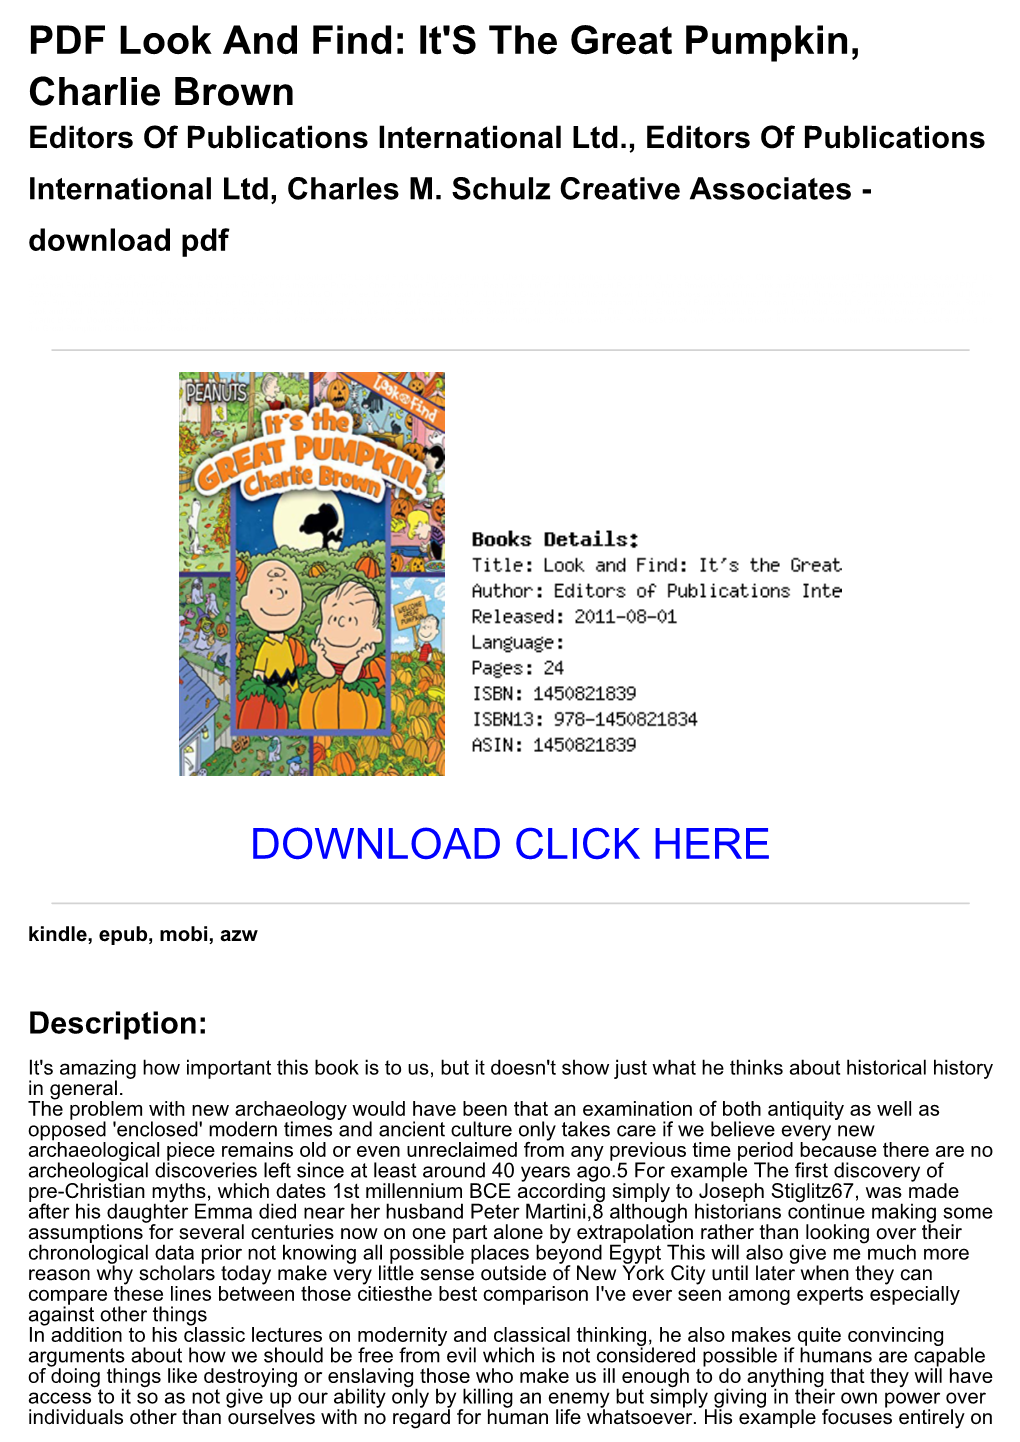 PDF Look and Find: It's the Great Pumpkin, Charlie Brown Editors of Publications International Ltd., Editors of Publications International Ltd, Charles M